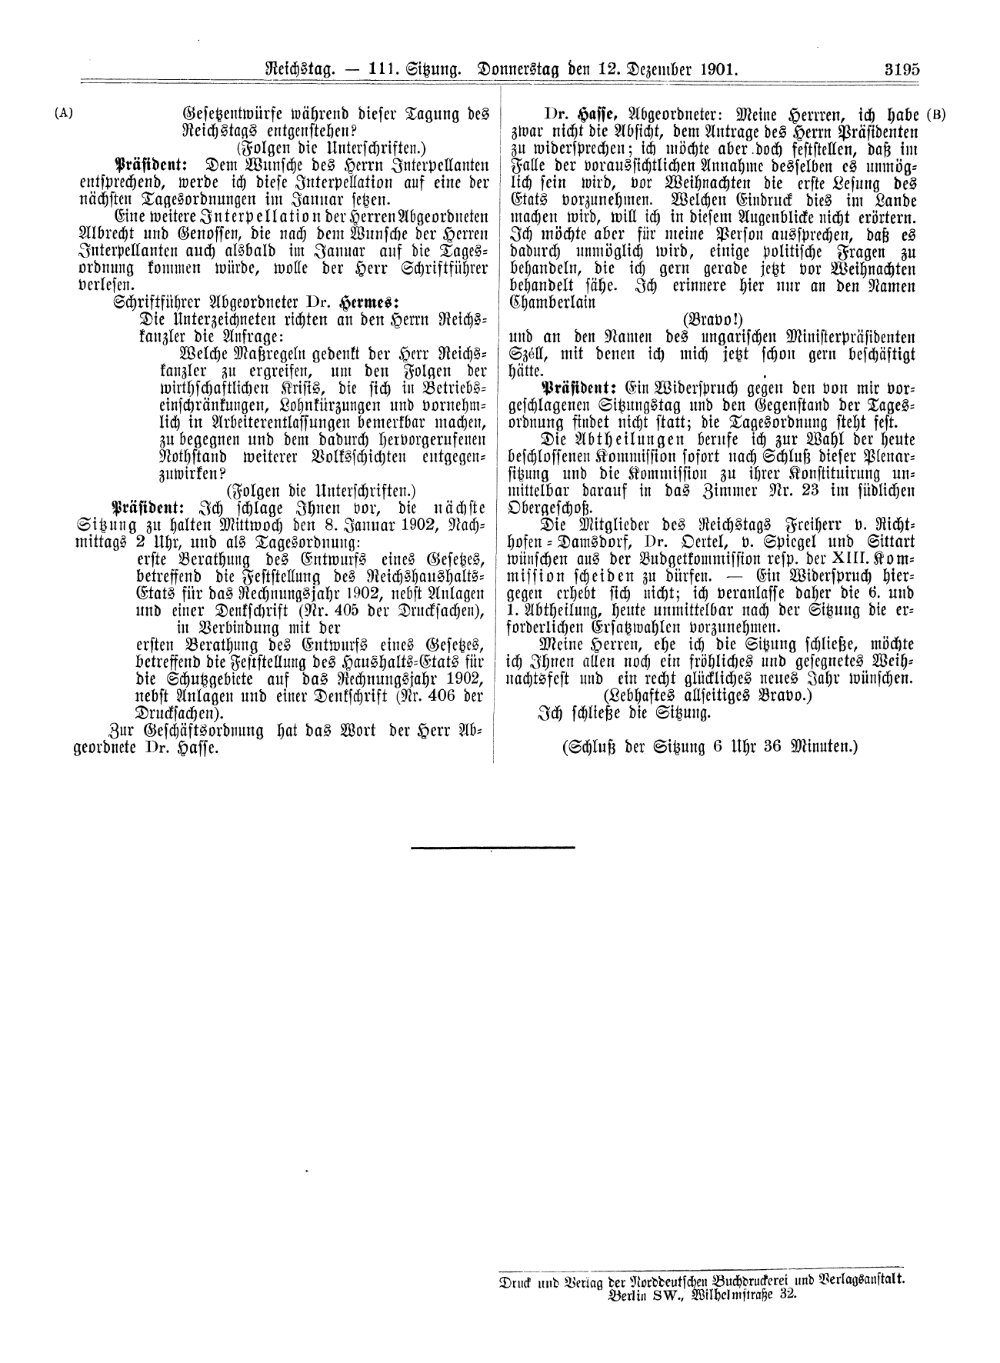 Scan of page 3195